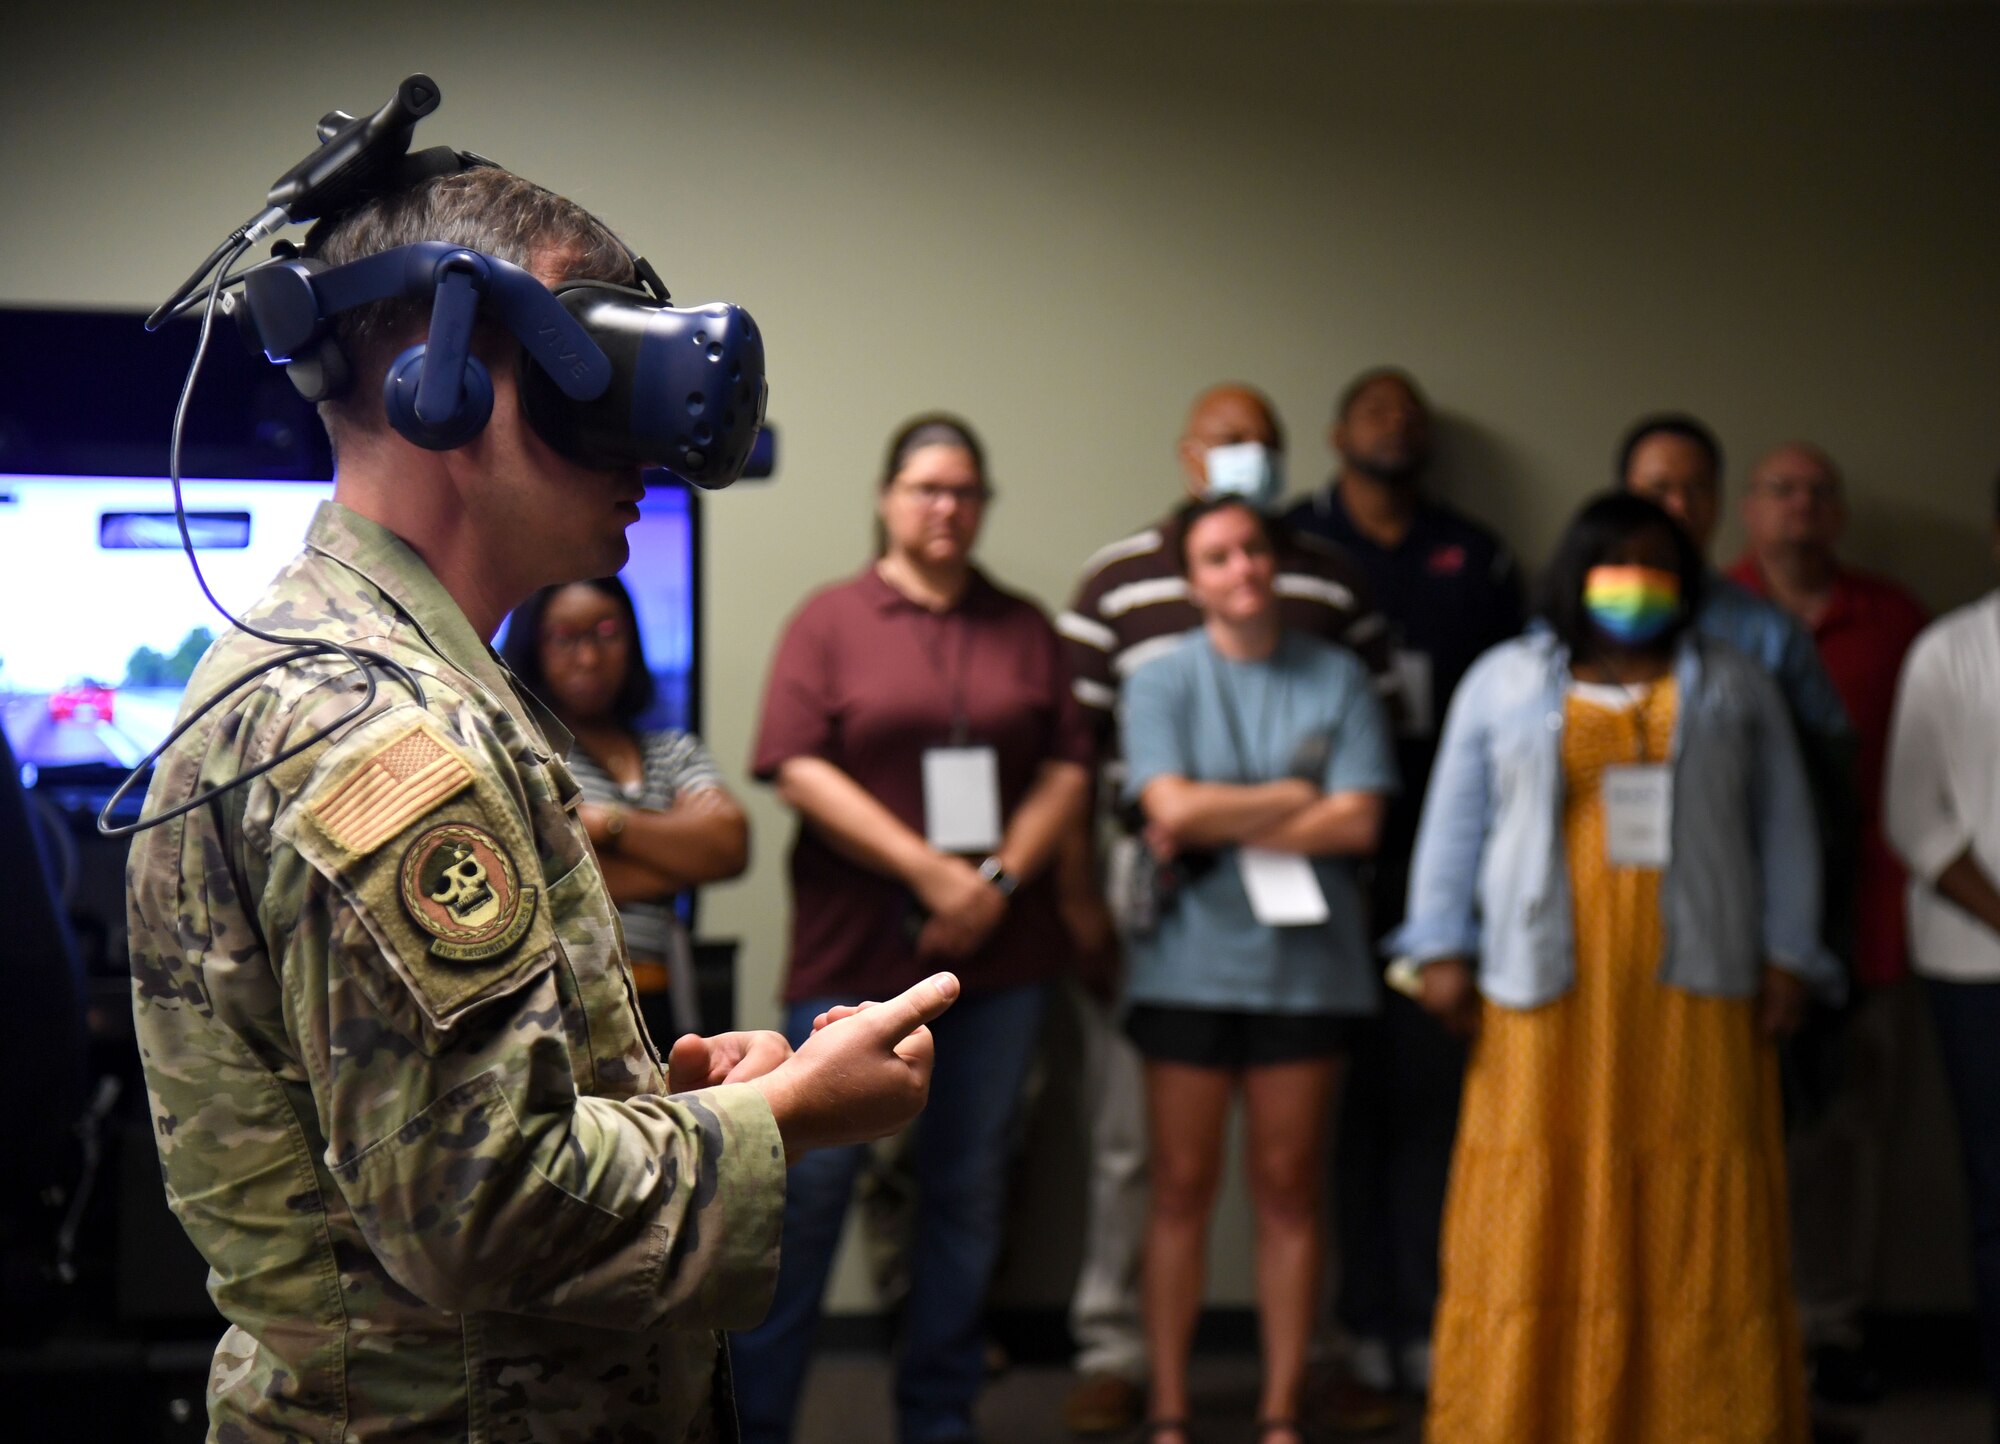 U.S. Air Force Staff Sgt. John James, 81st Security Forces Squadron unit trainer, provides a virtual reality training demonstration during the Mississippi Educators Tour for Law and Public Safety and Fire Science tour inside the 403rd Security Forces Squadron Combat Arms building at Keesler Air Force Base, Mississippi, July 27, 2022. More than 30 educators also toured the Keesler Fire Department and received a military working dog demonstration. (U.S. Air Force photo by Kemberly Groue)